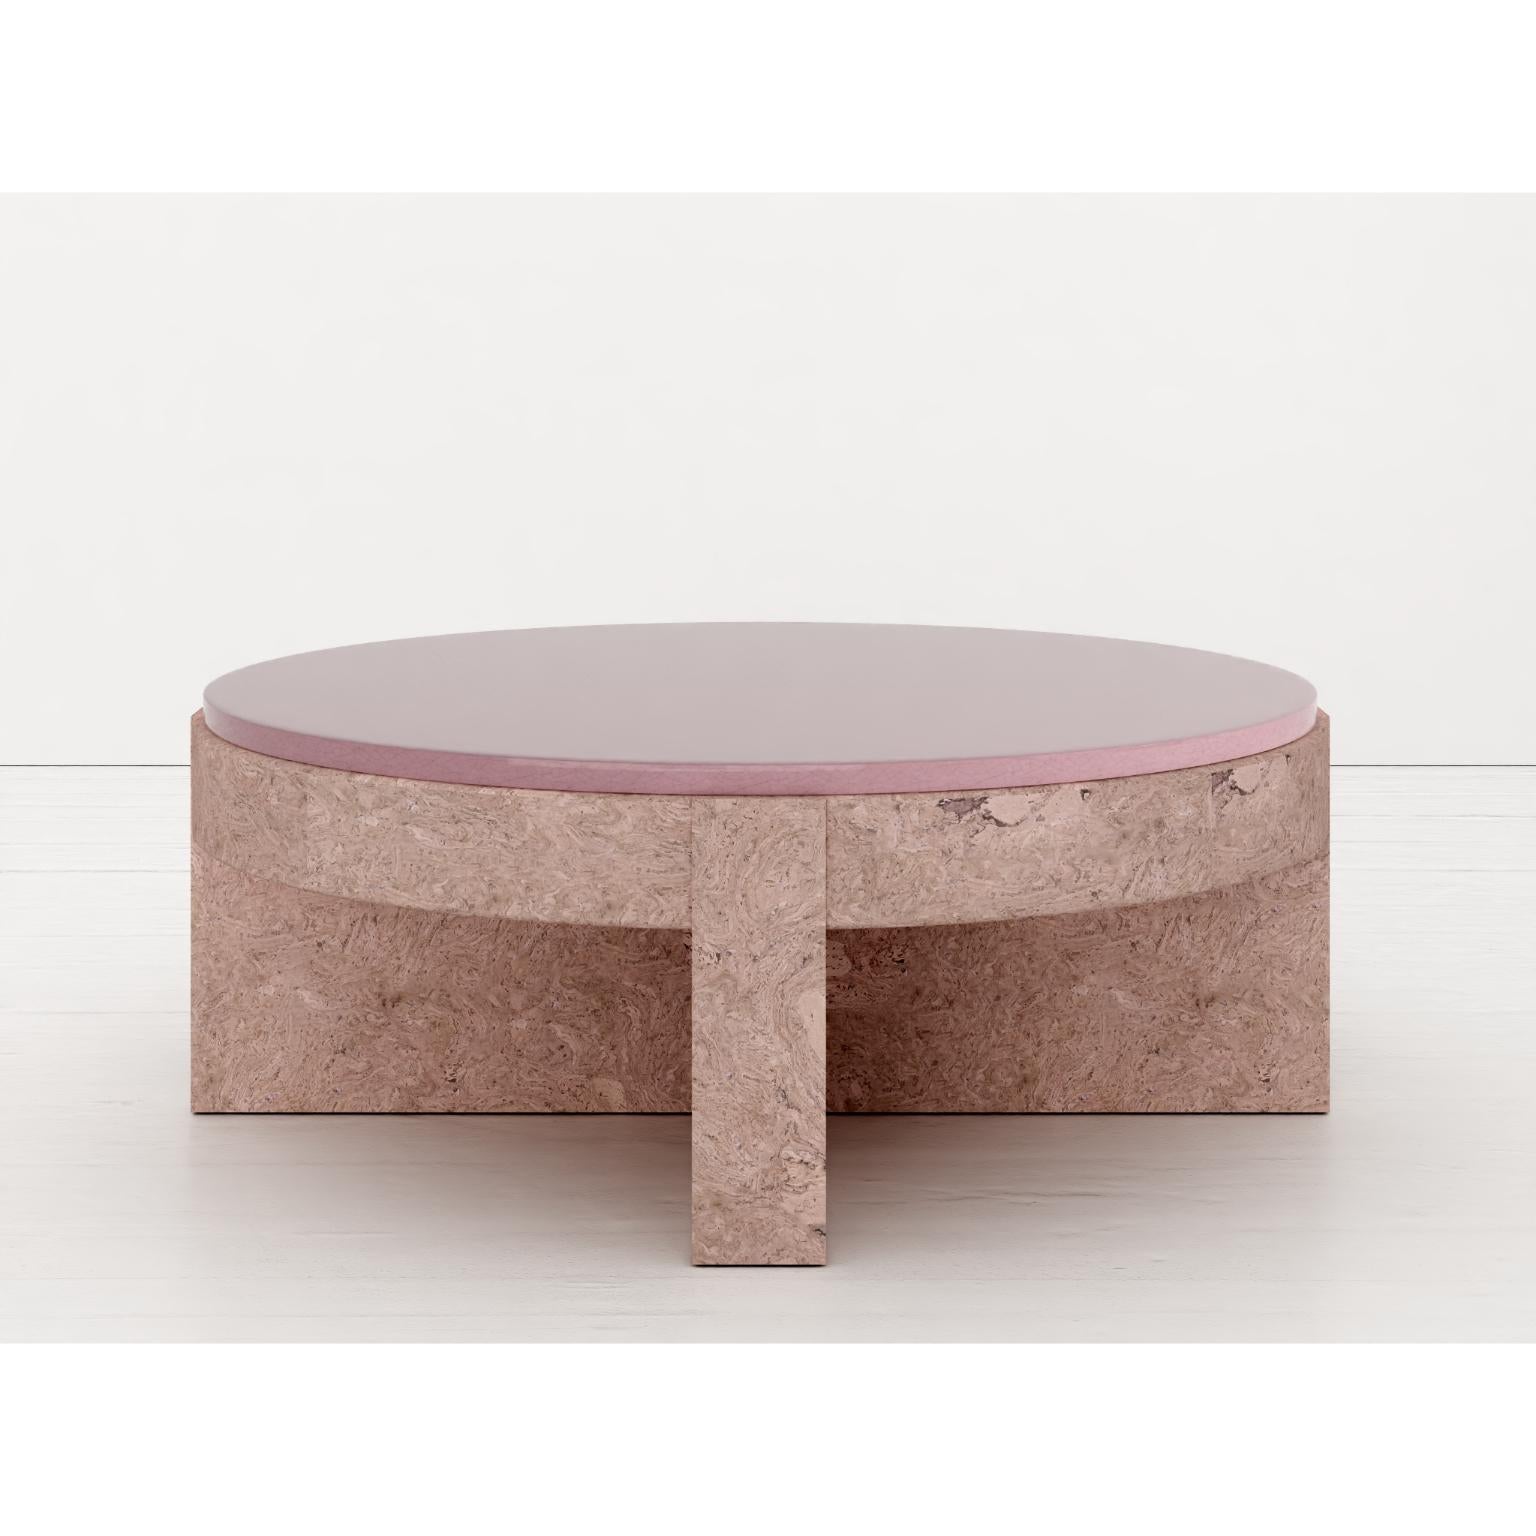 Object 08 Violet Seating by Volta
One Of A Kind.
Dimensions: D 80 x W 80 x H 30 cm.
Materials: Cork and ceramic.

Also available in diffentent colors. Please contact us.

MEÏ COLLECTION
The Meï collection was born from the desire to highlight the